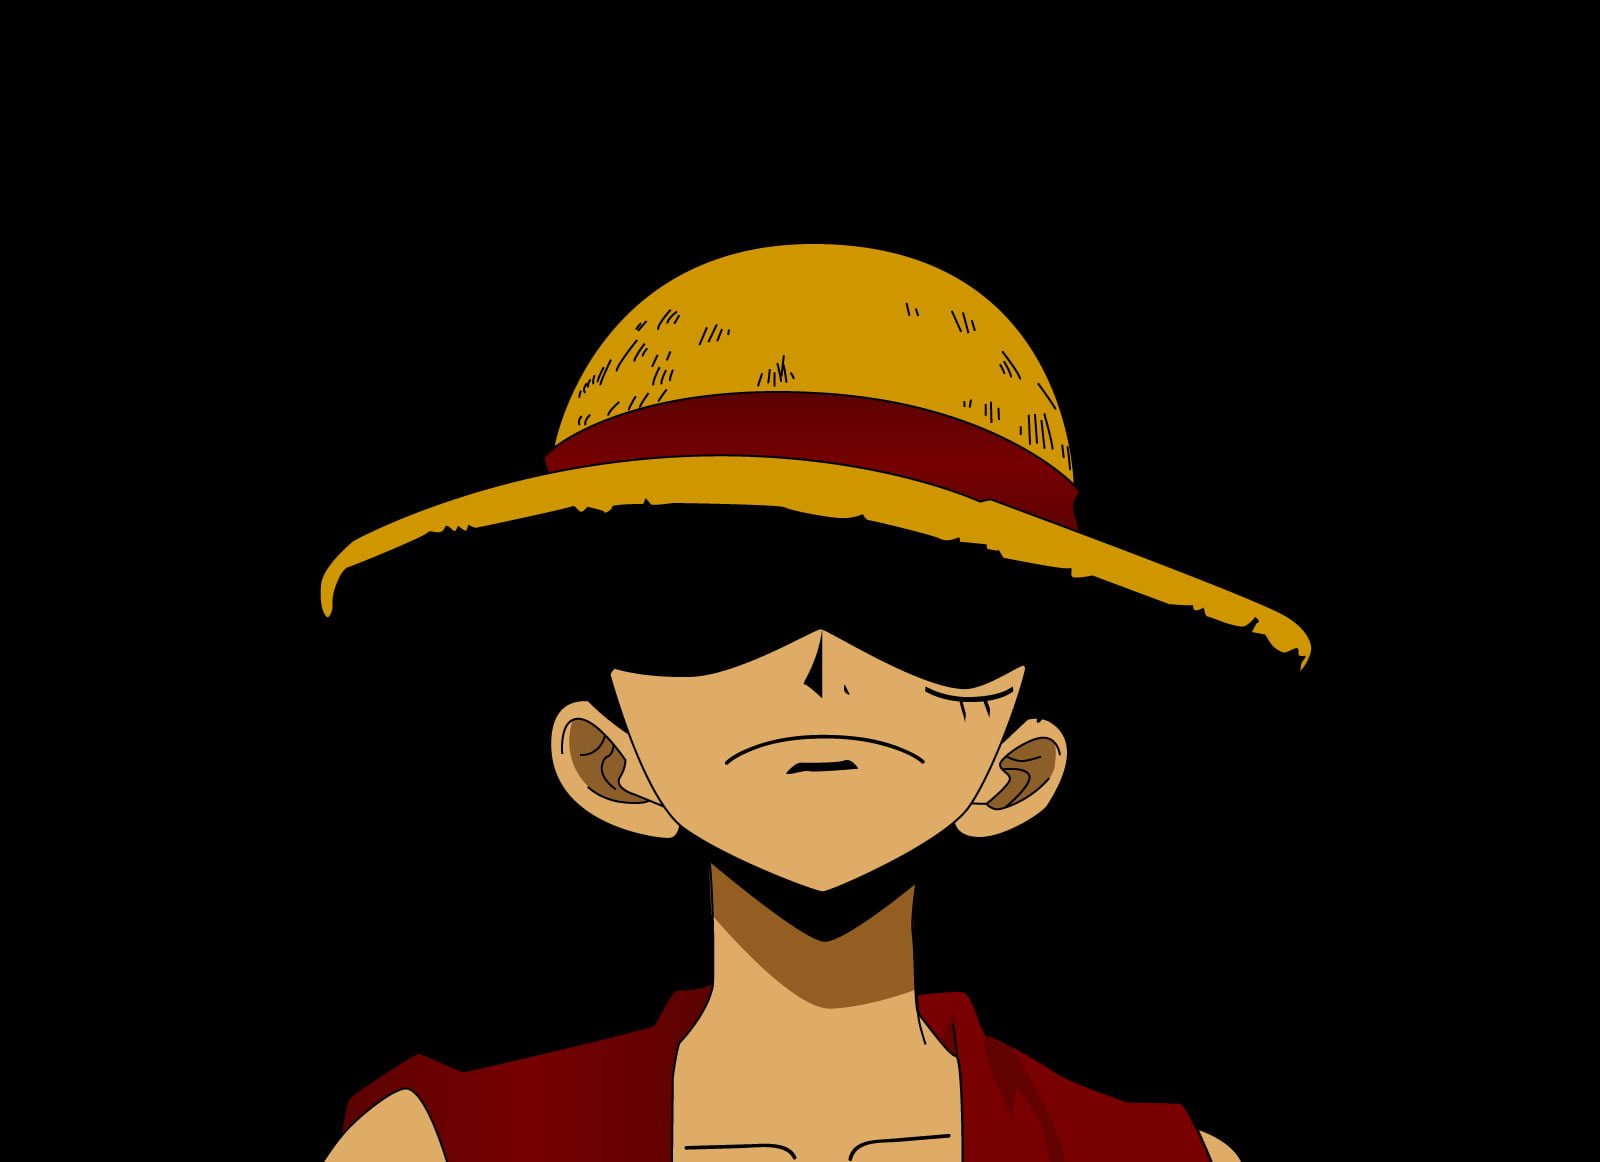 Monkey D. Luffy Wallpaper, One Piece, Anime, One Person, Studio Shot,  Indoors - Wallpaperforu